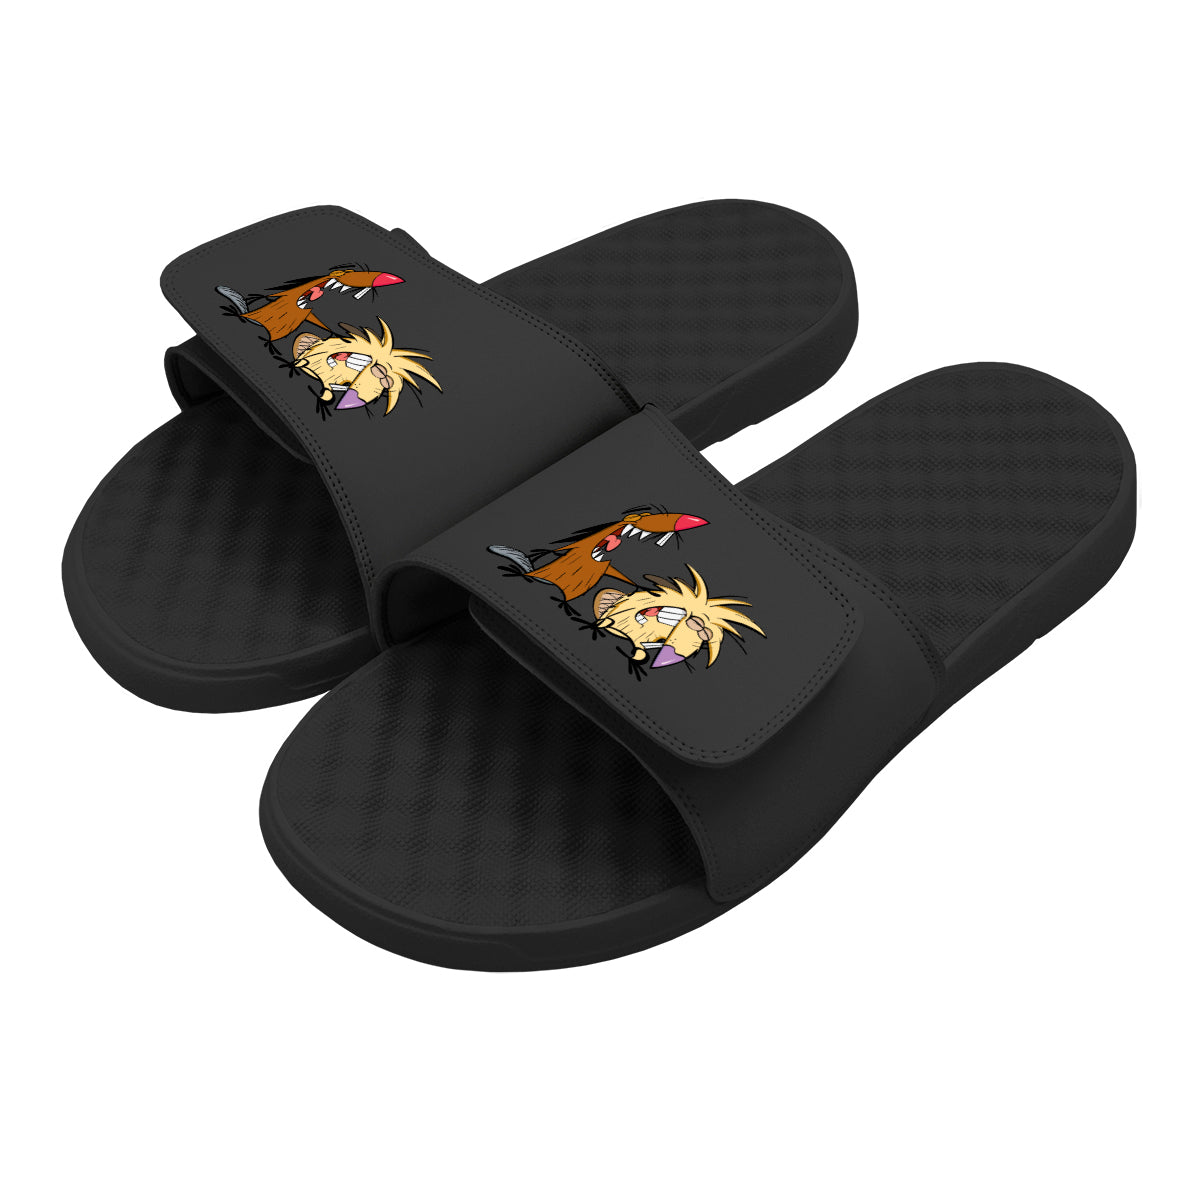 Angry Beavers Laughing Slides